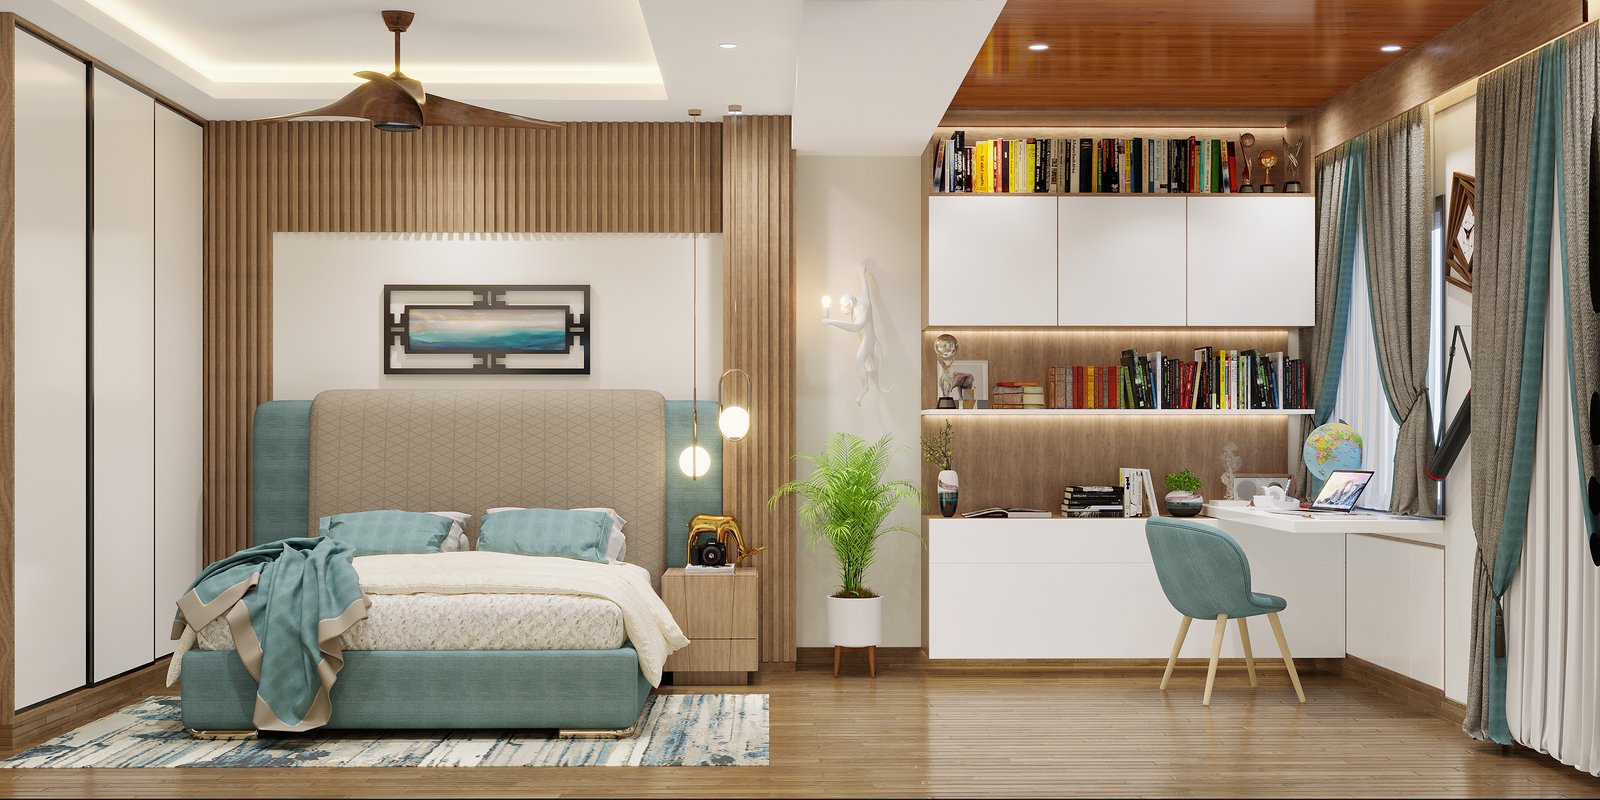 <span  class="uc_style_uc_tiles_grid_image_elementor_uc_items_attribute_title" style="color:#ffffff;">BEDROOM7</span>